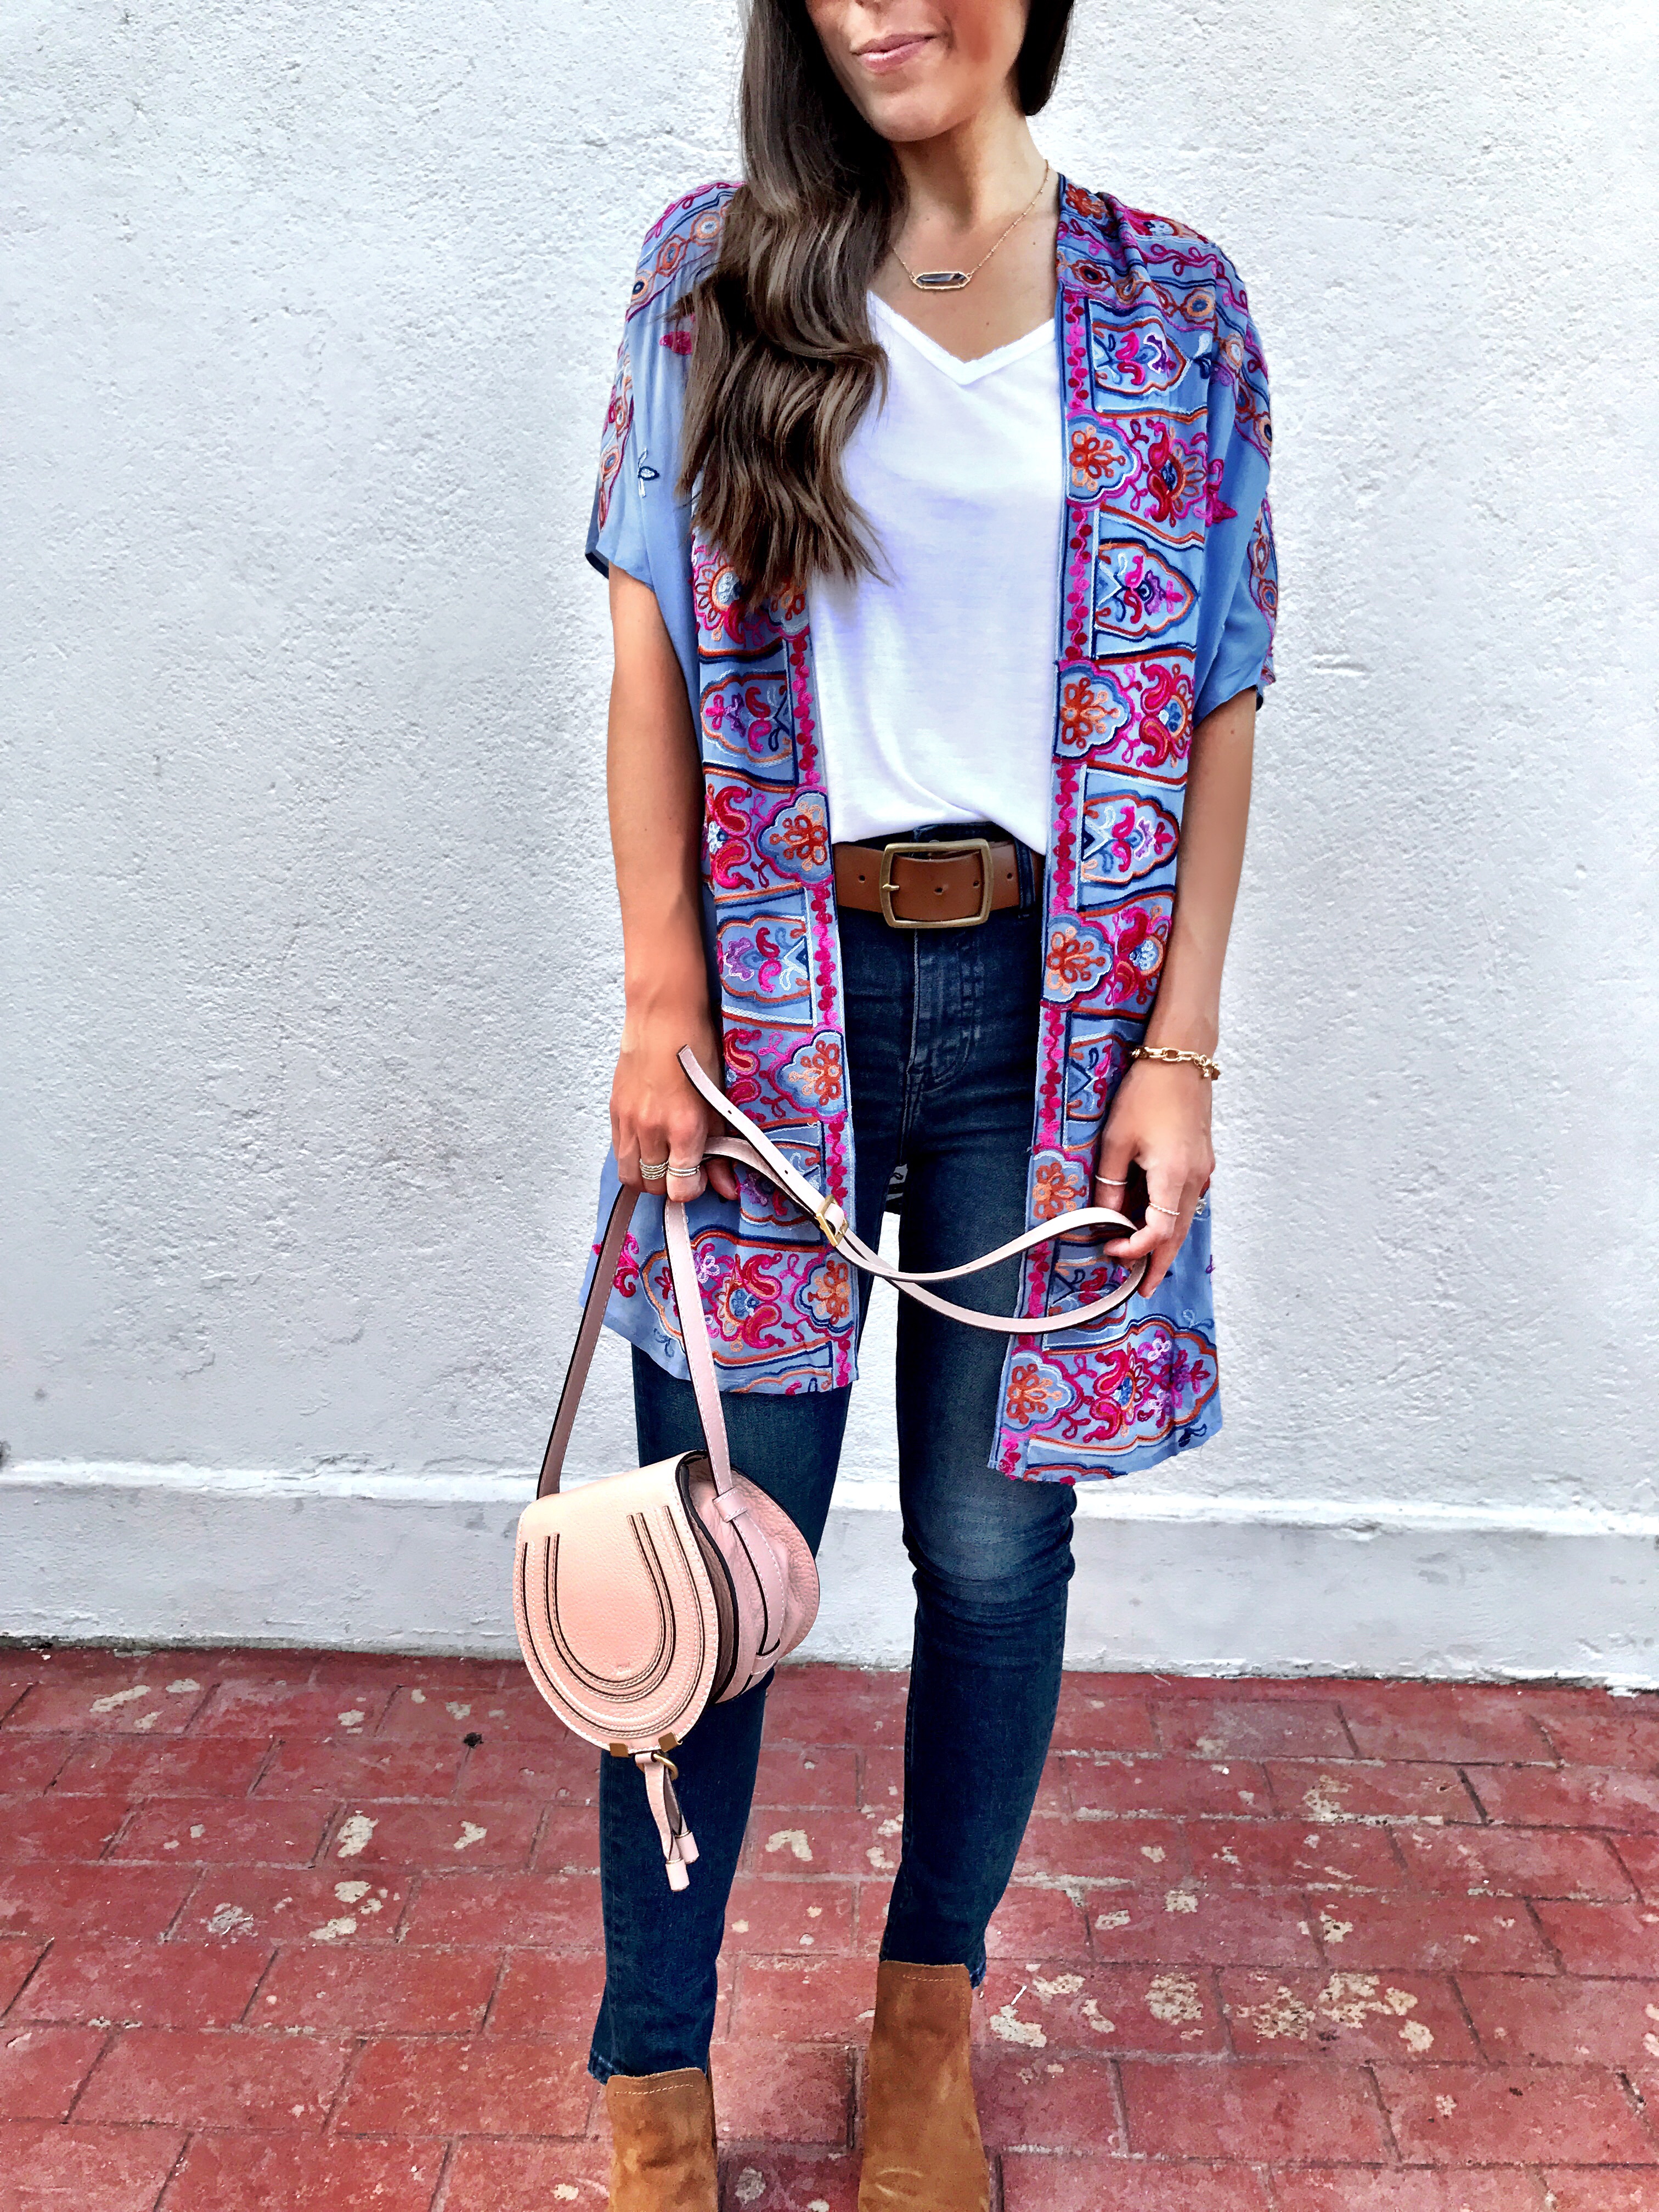 Casual Transitional Outfit | MrsCasual